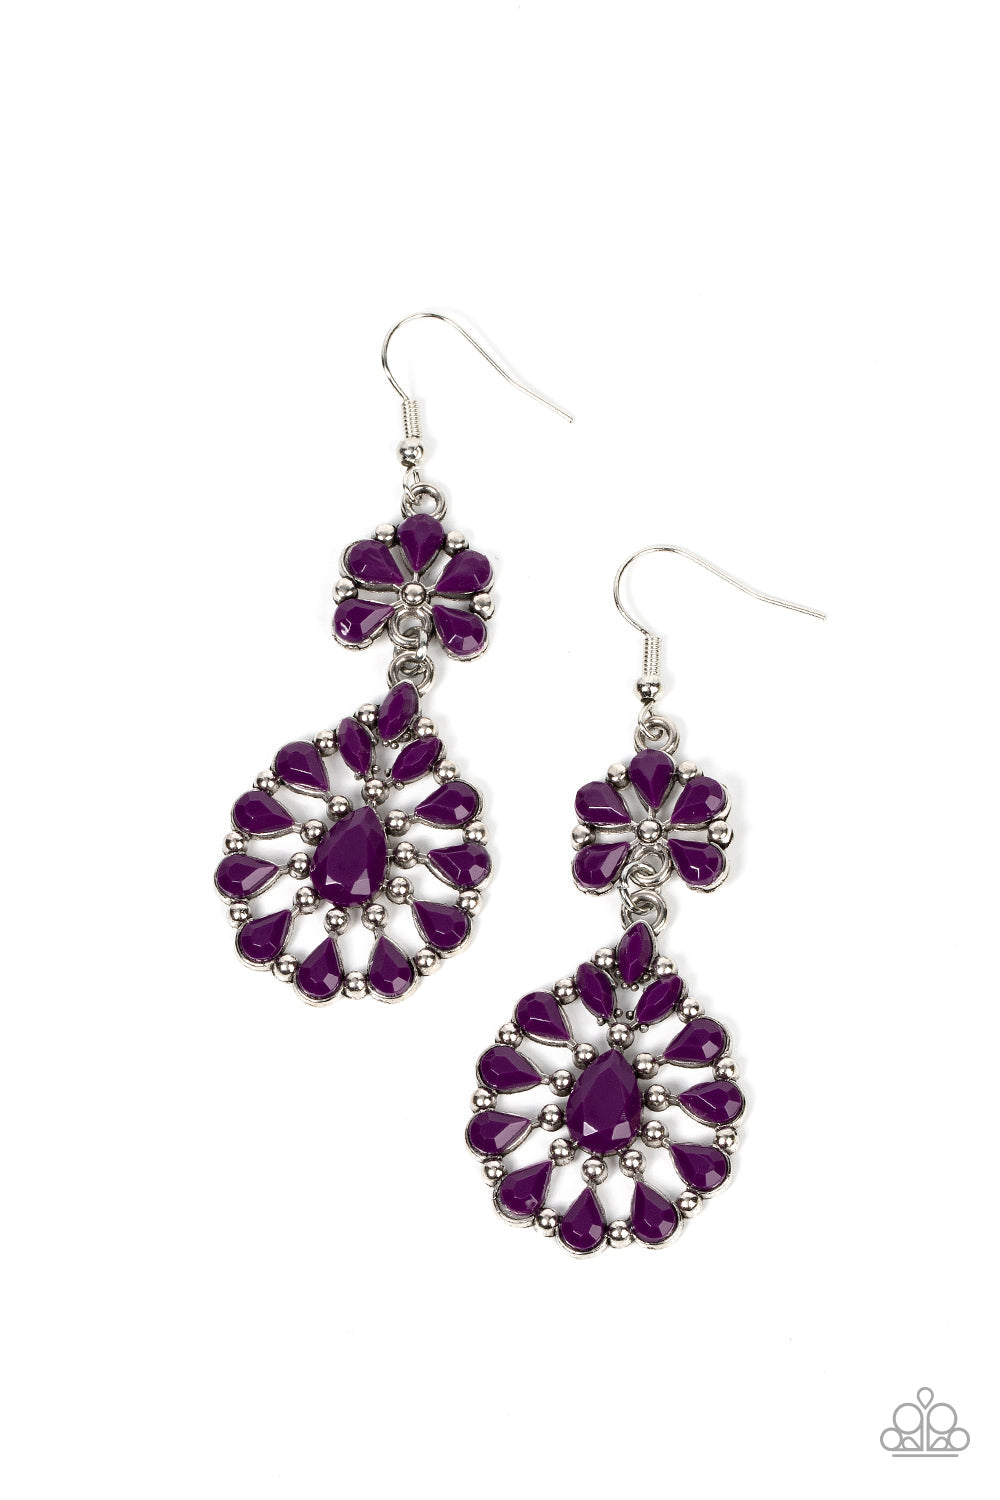 Posh Palooza - Plum Purple and Silver Earrings - Paparazzi Accessories - Two plum beaded and silver studded frames delicately link into a vivacious lure, creating a colorful pop of floral inspiration. Earring attaches to a standard fishhook fitting.